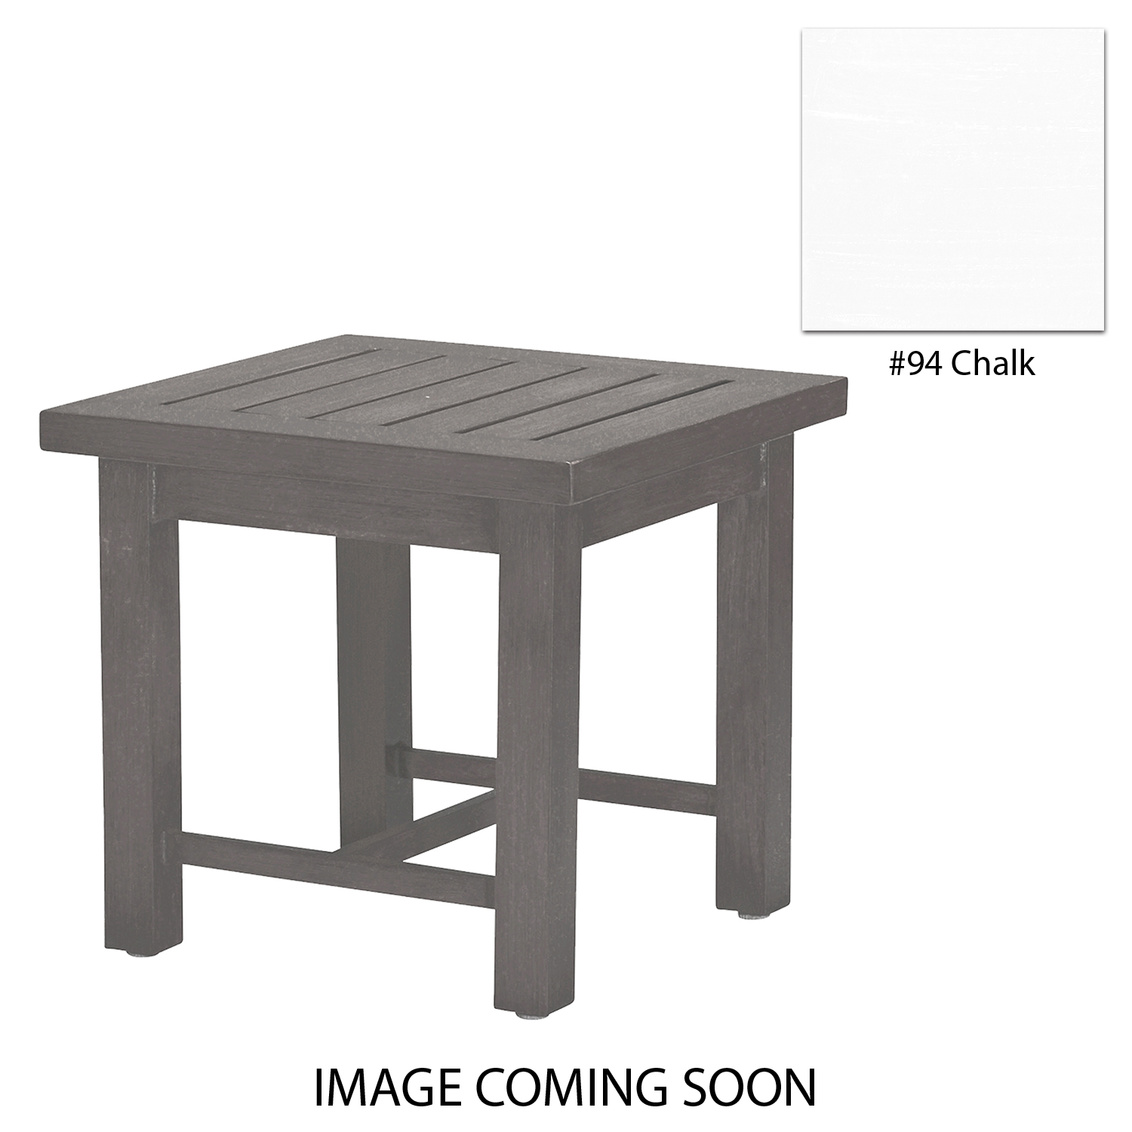 club aluminum end table in chalk product image